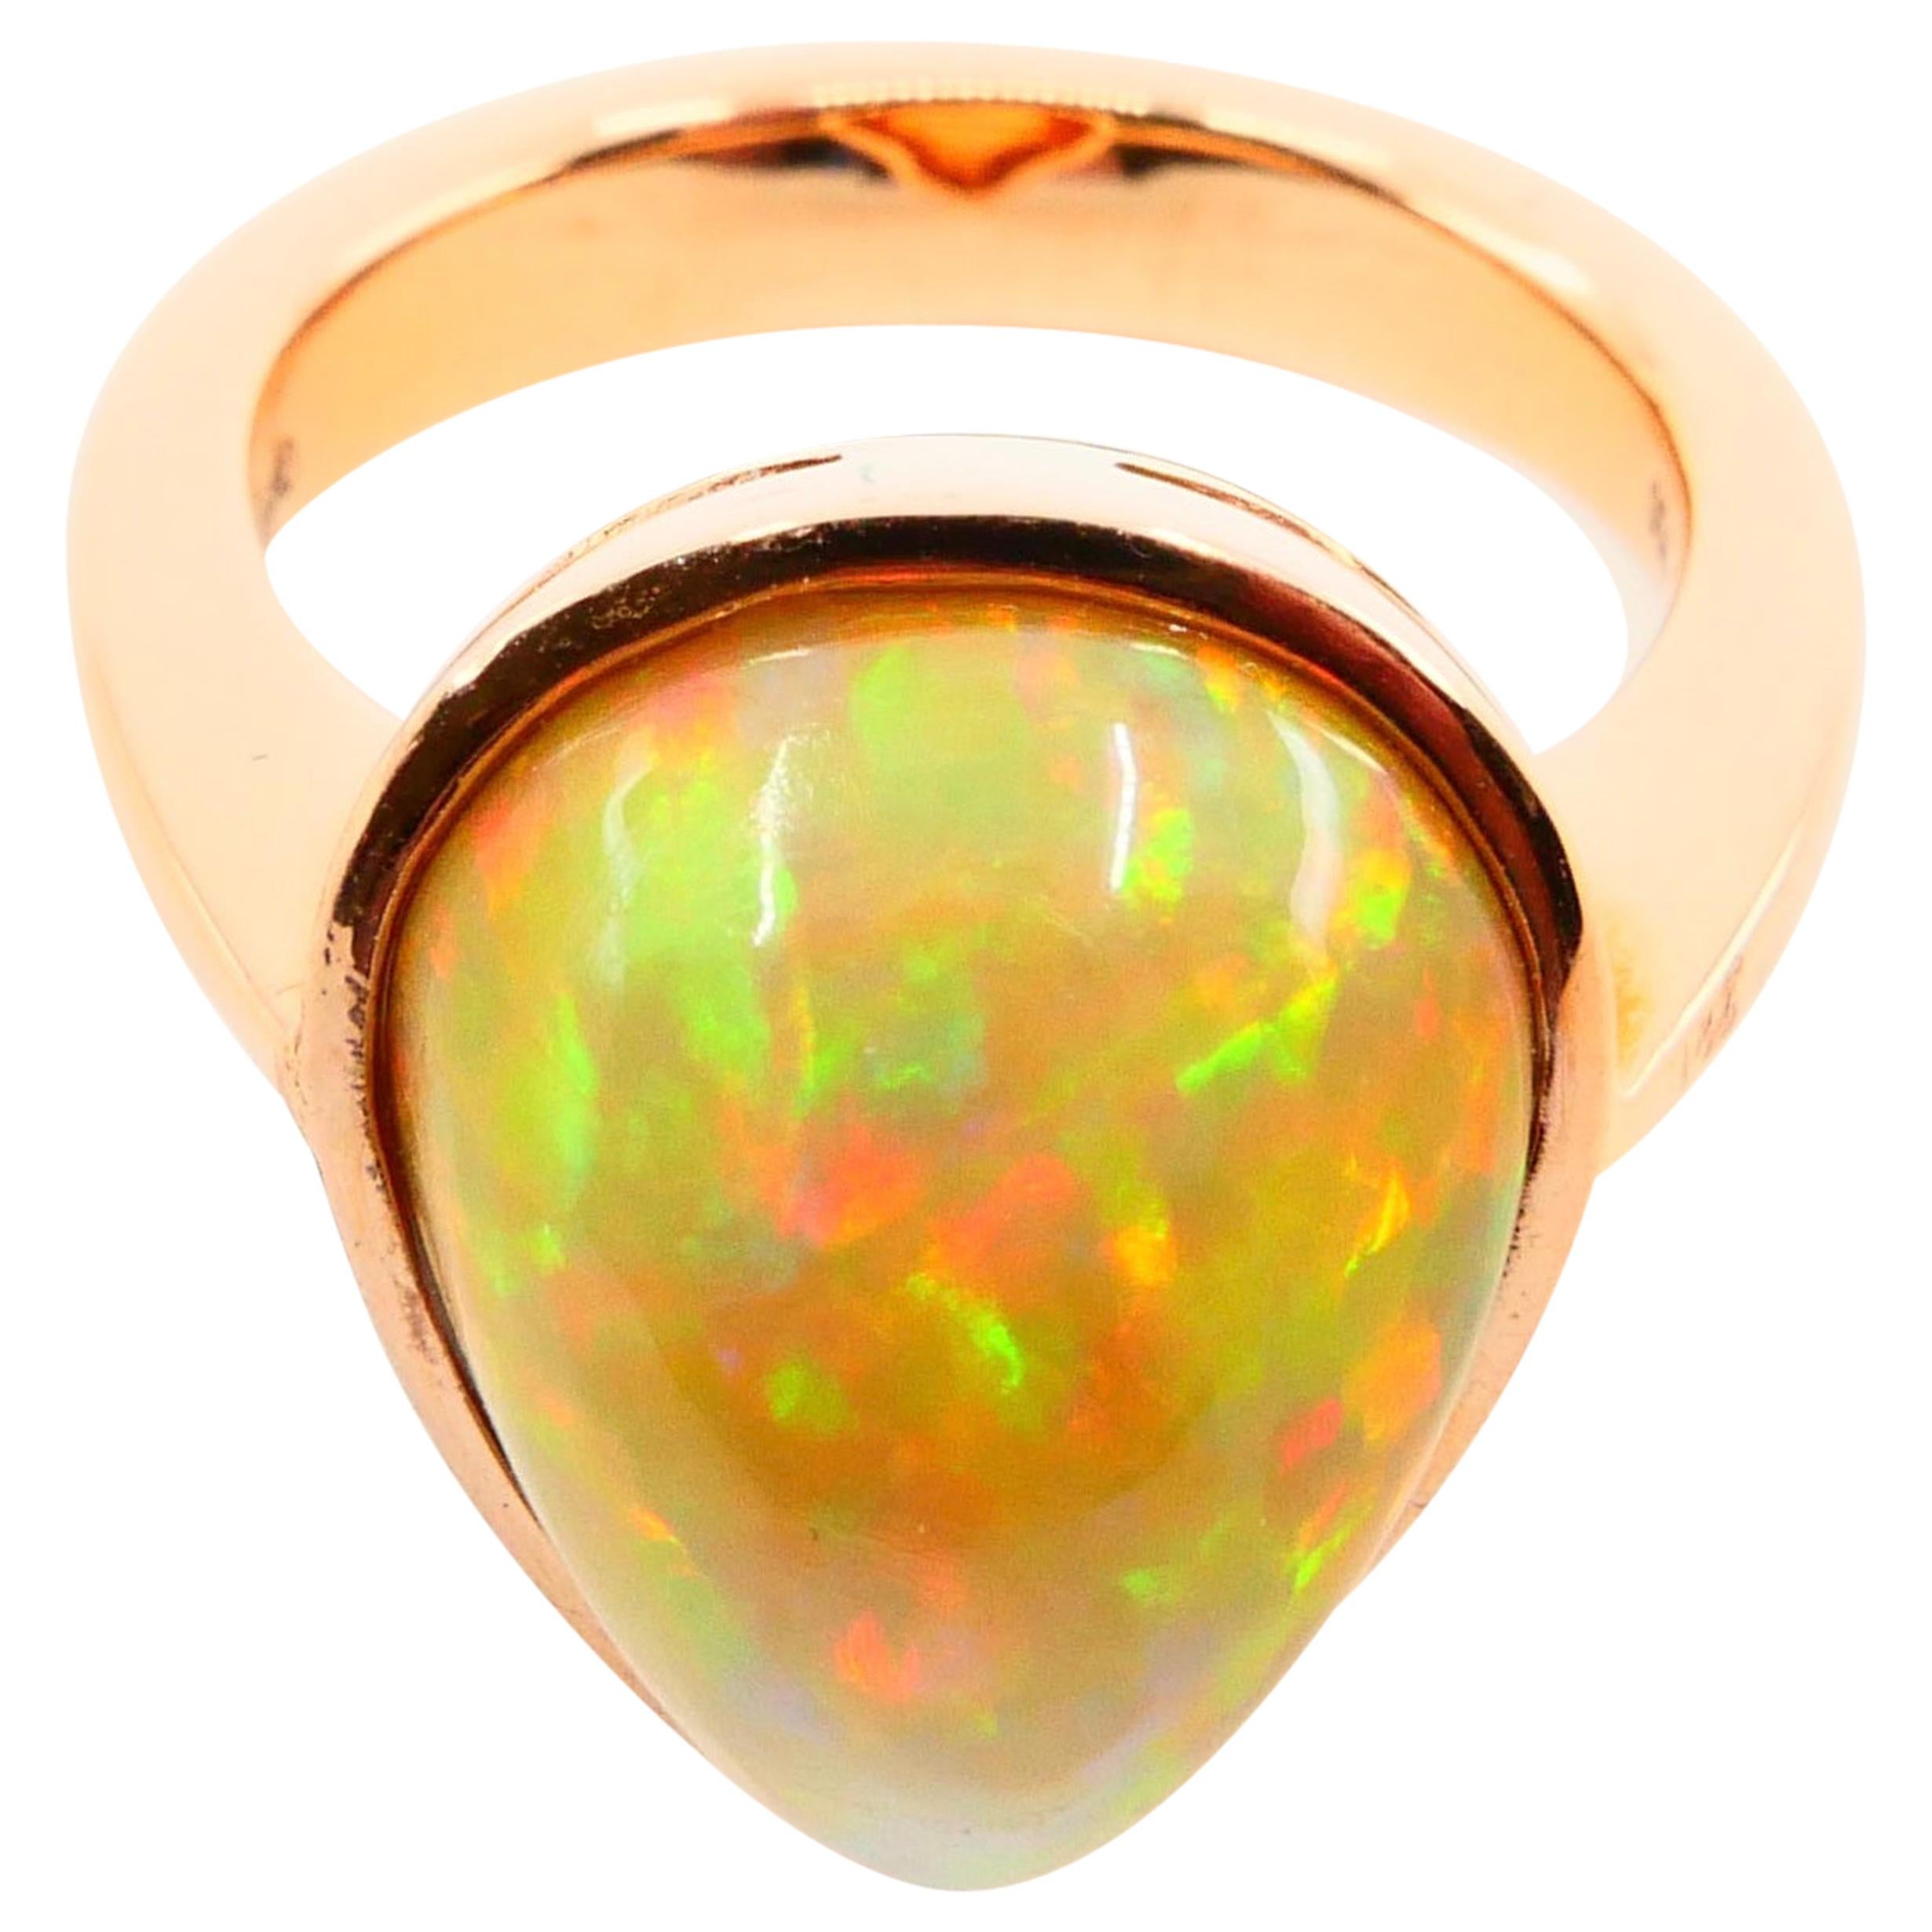 Pear Cut 5.85 Carat Opal Ring Set in 18 Karat Gold Colorful Red, Green, Orange and Yellow